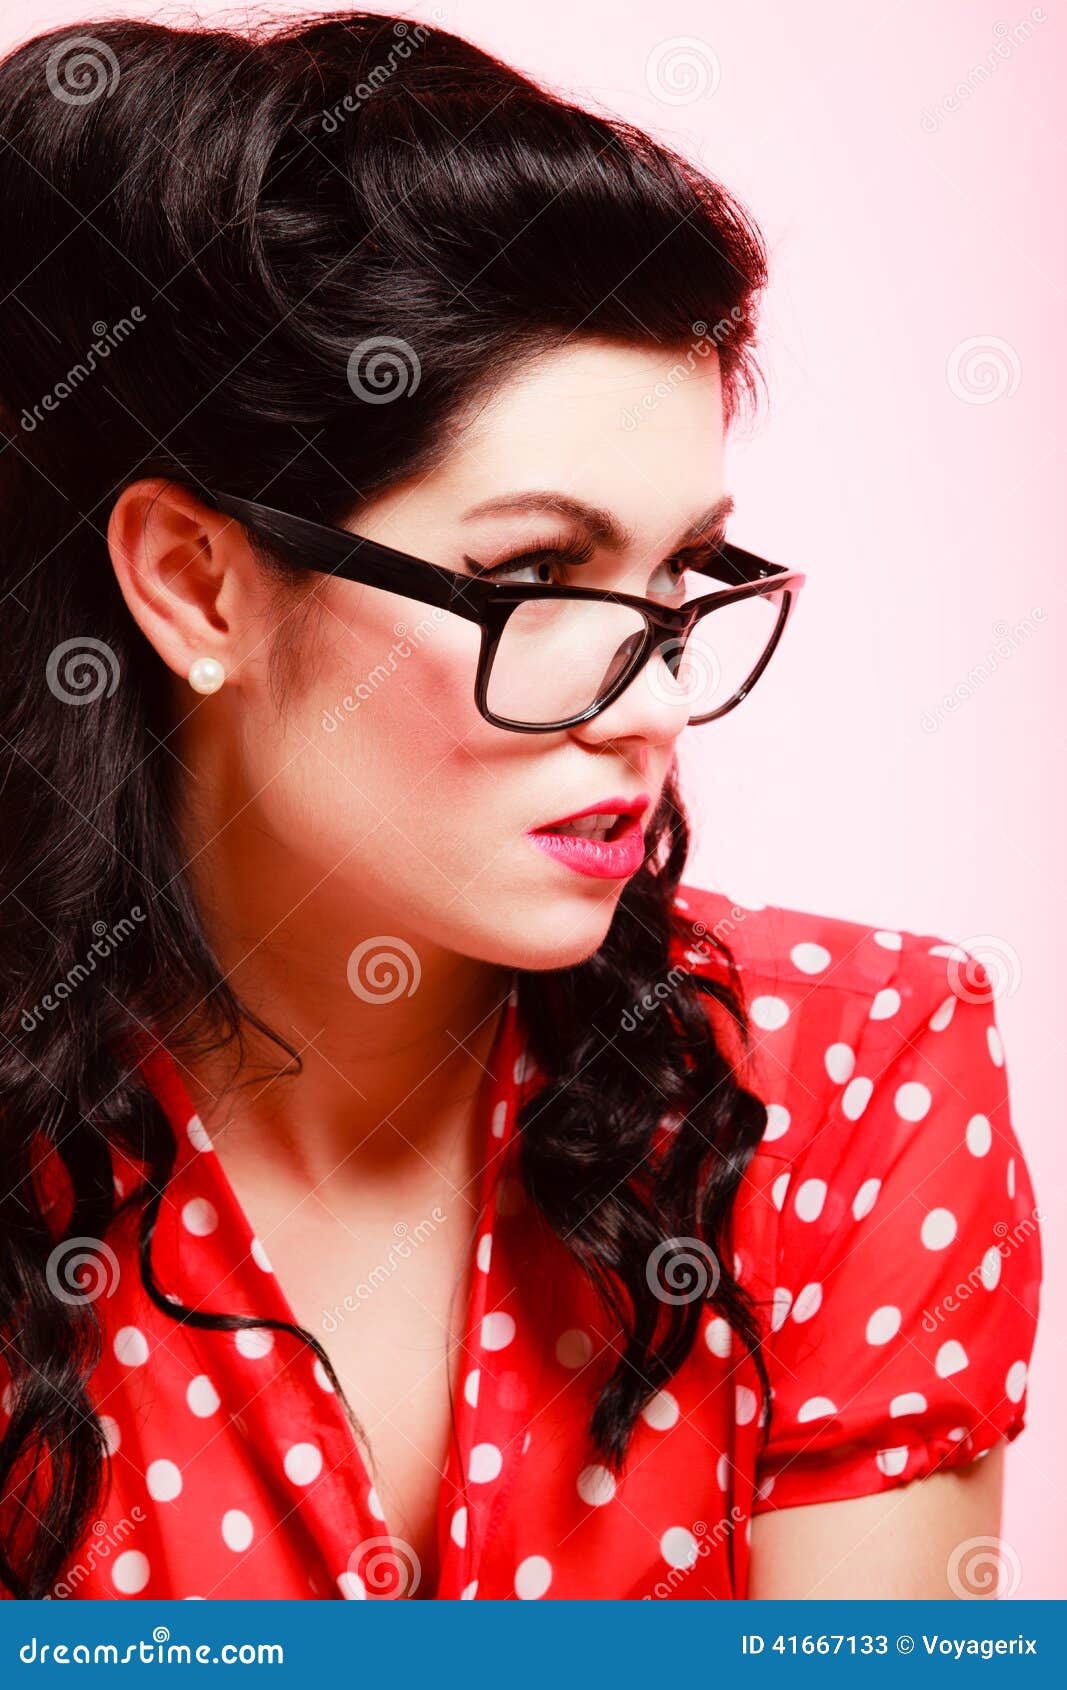 Retro Portrait Of Pinup Girl In Eyeglasses Stock Image Image Of 